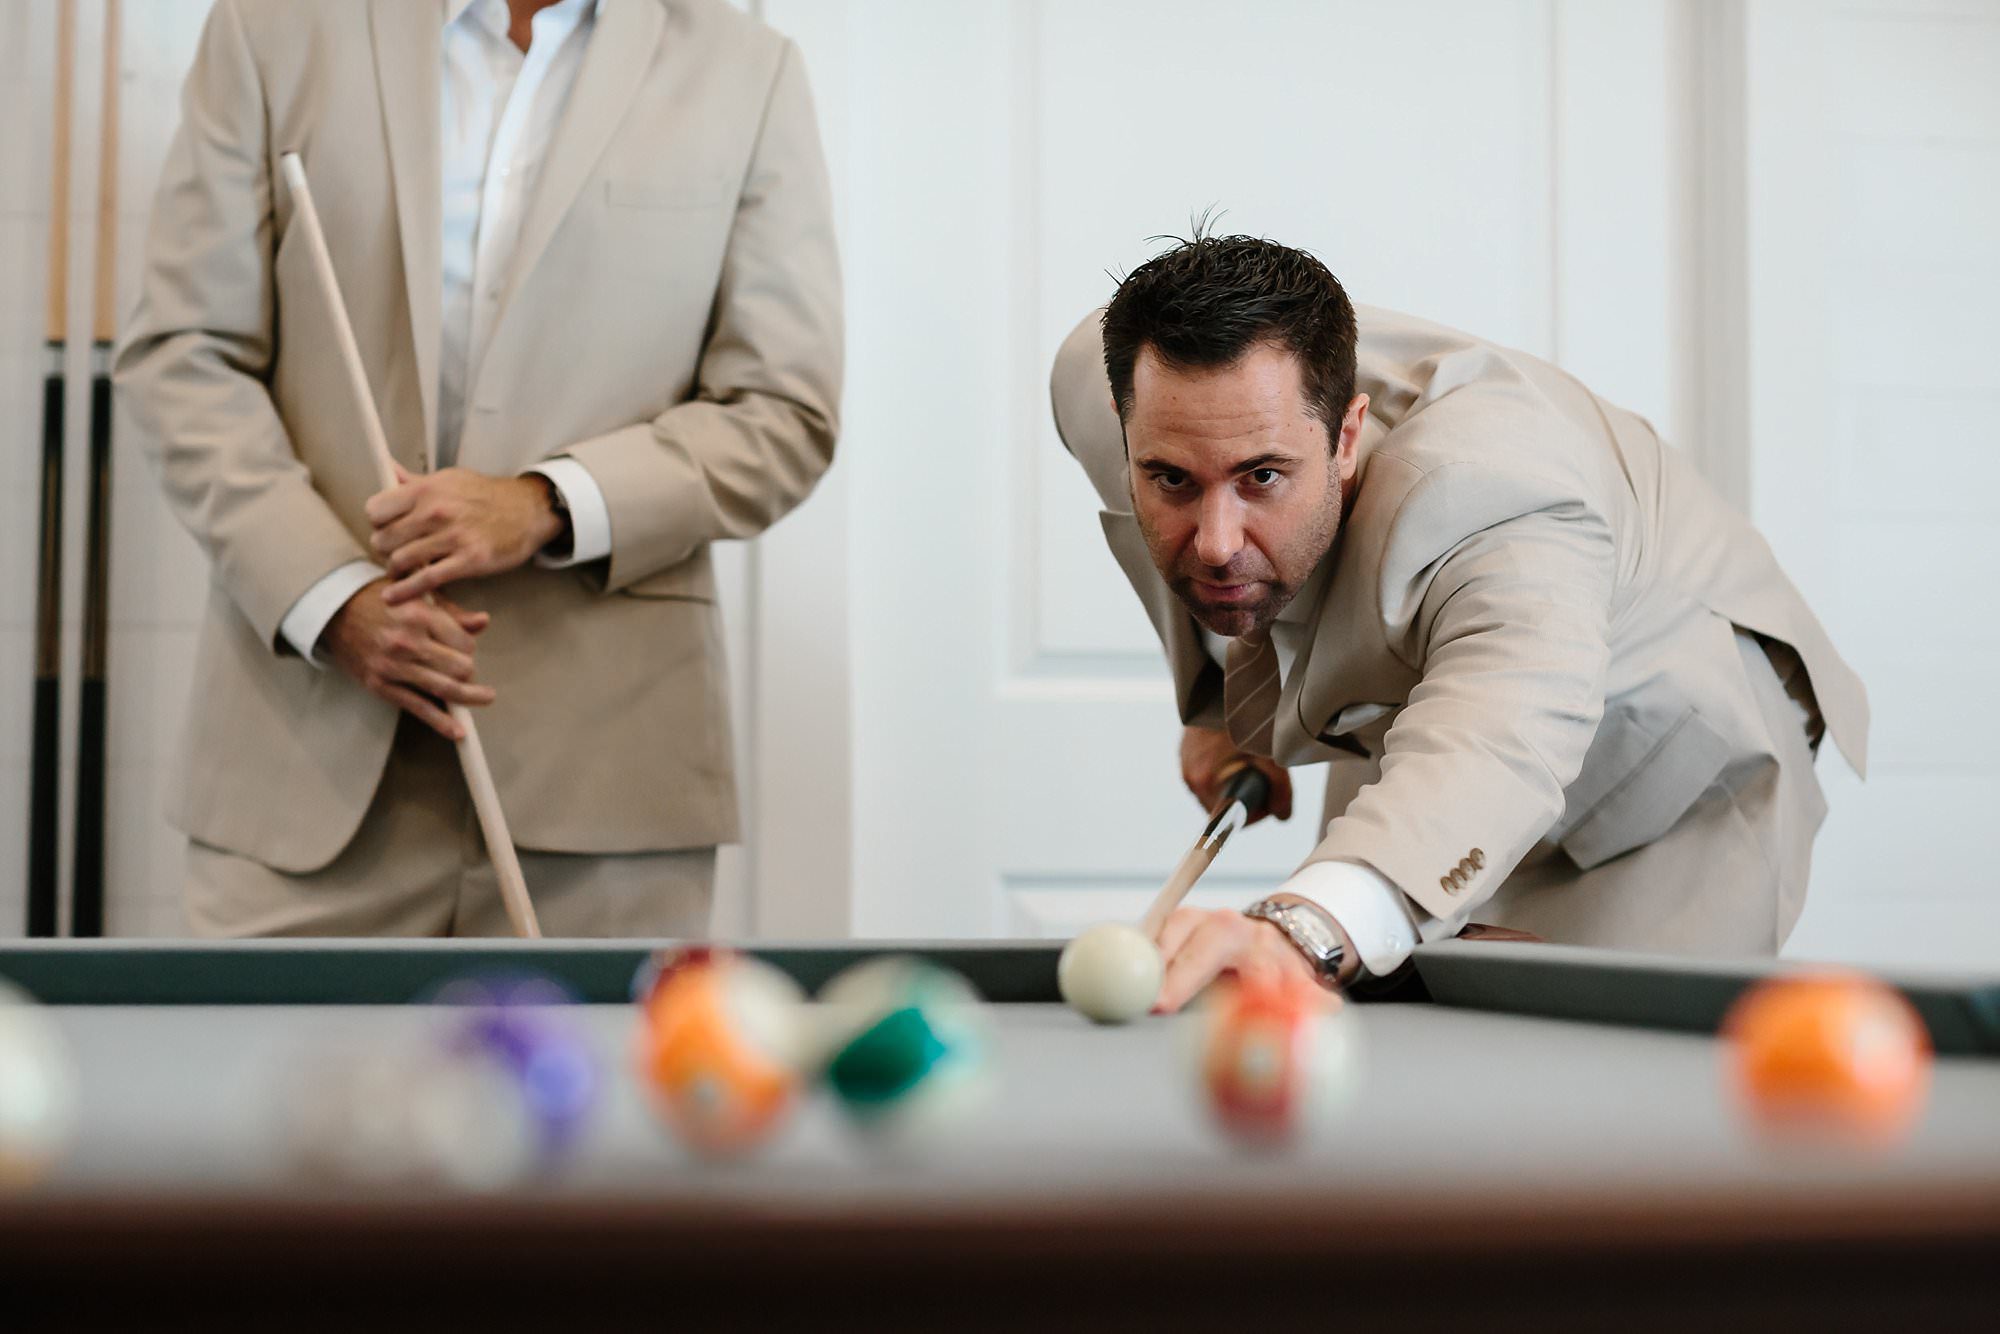 Low view of Groom lining up a shot while playing pool with best man